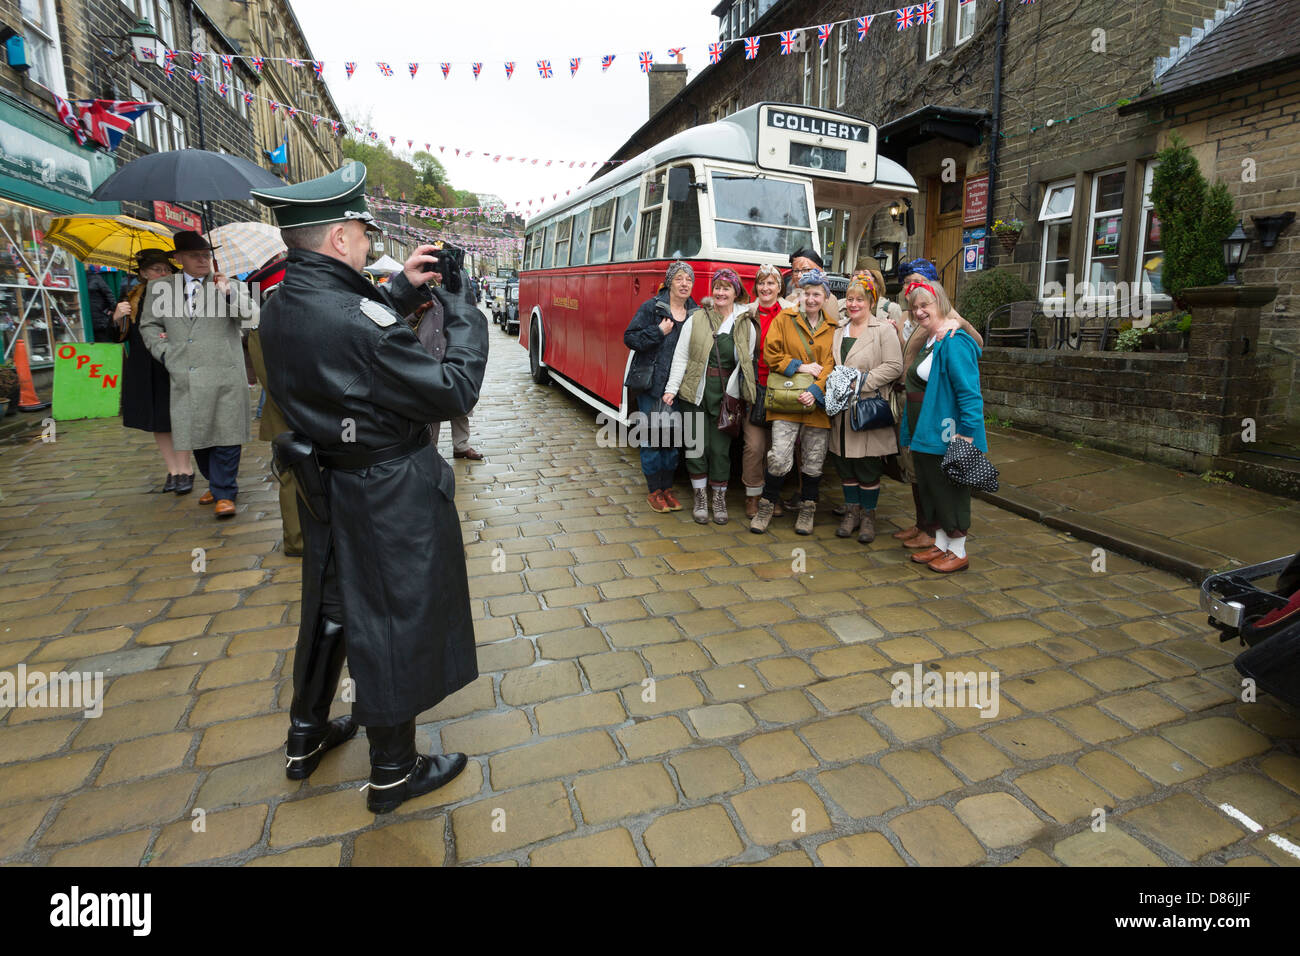 A man in German Army uniform photographing a group of women dressed as land girls in front of a bus. Haworth 1940s weekend. Stock Photo